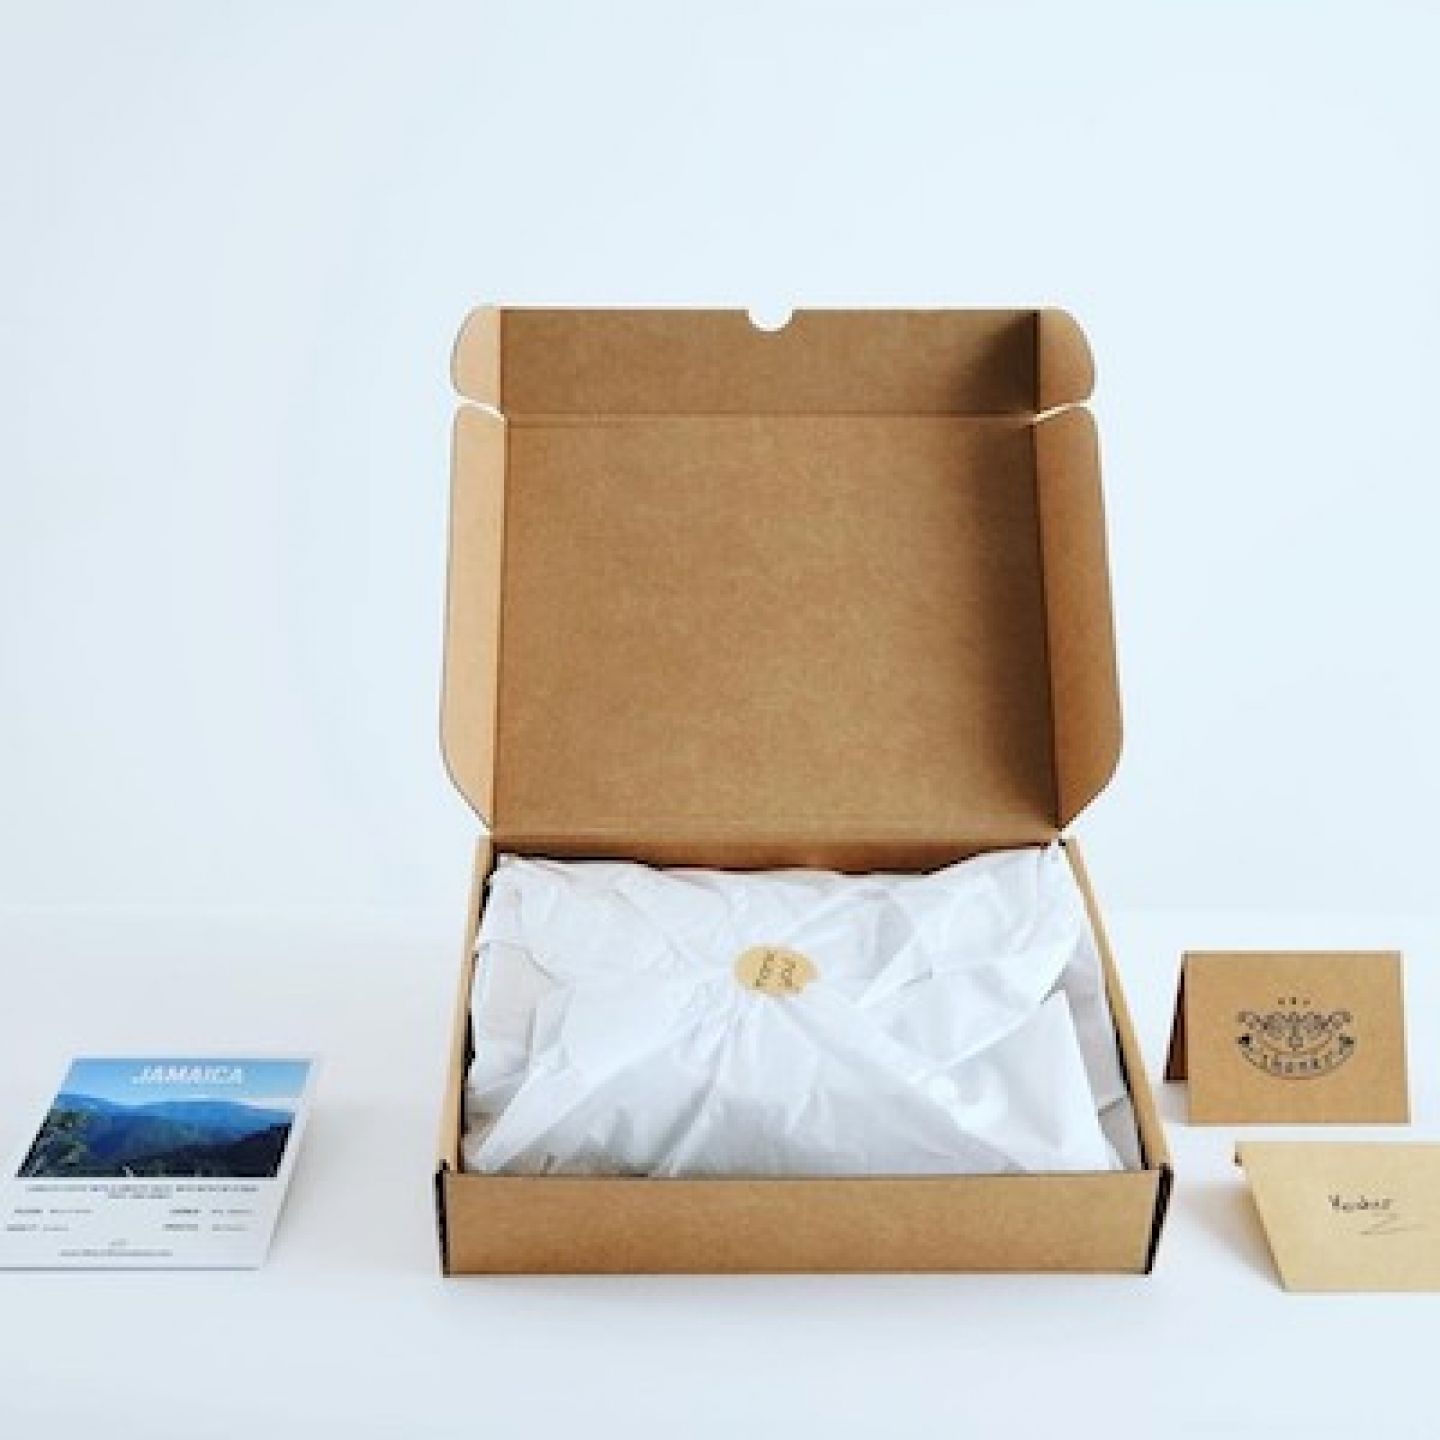 The Little Coffee Company gift box packaging